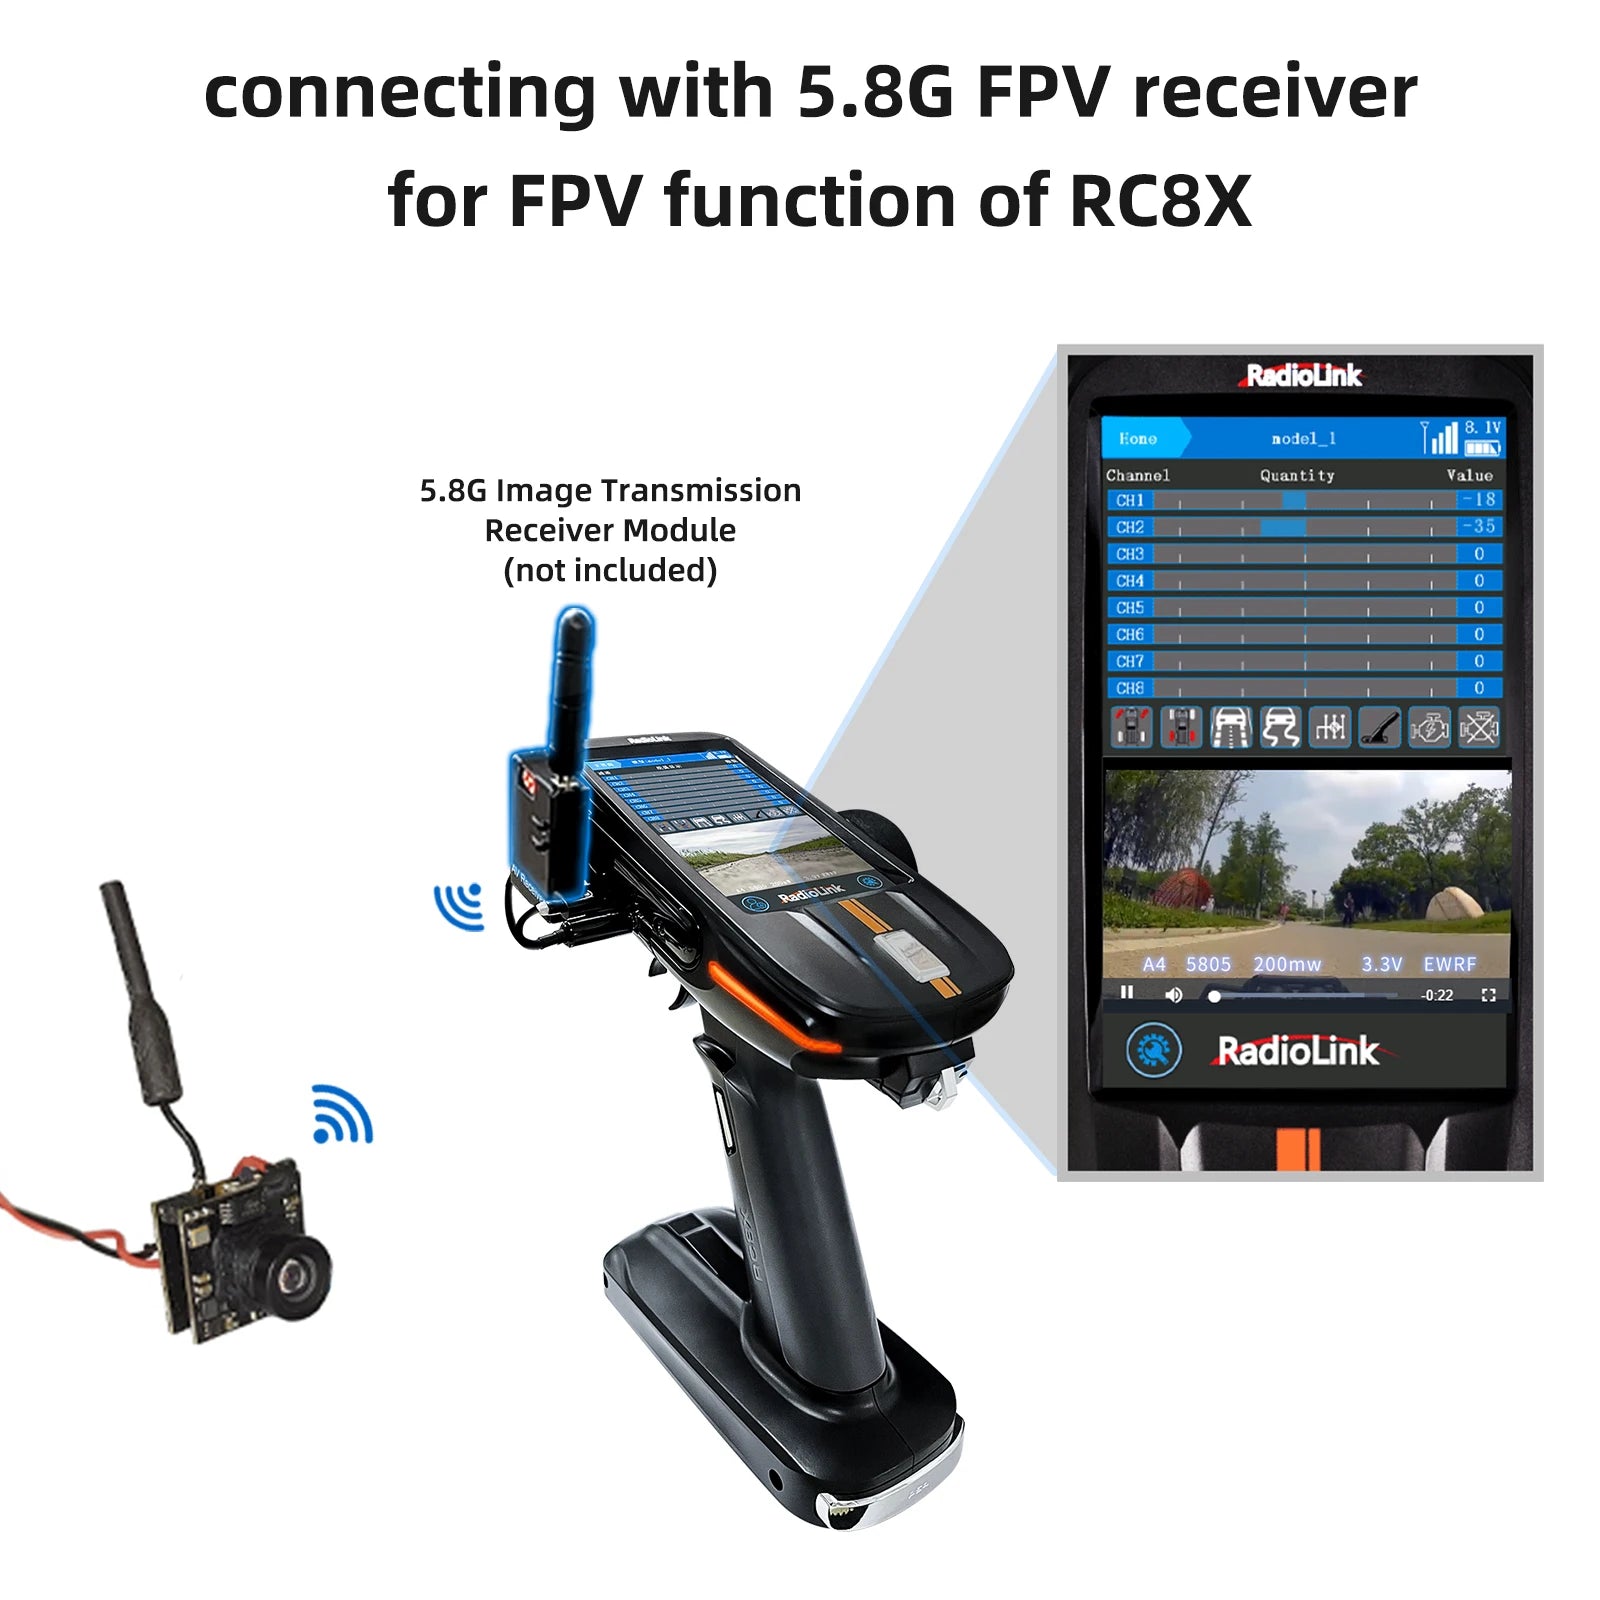 EWRF 800TVL Micro Camera, 5.8G FPV receiver is compatible with RC8X RedioUink